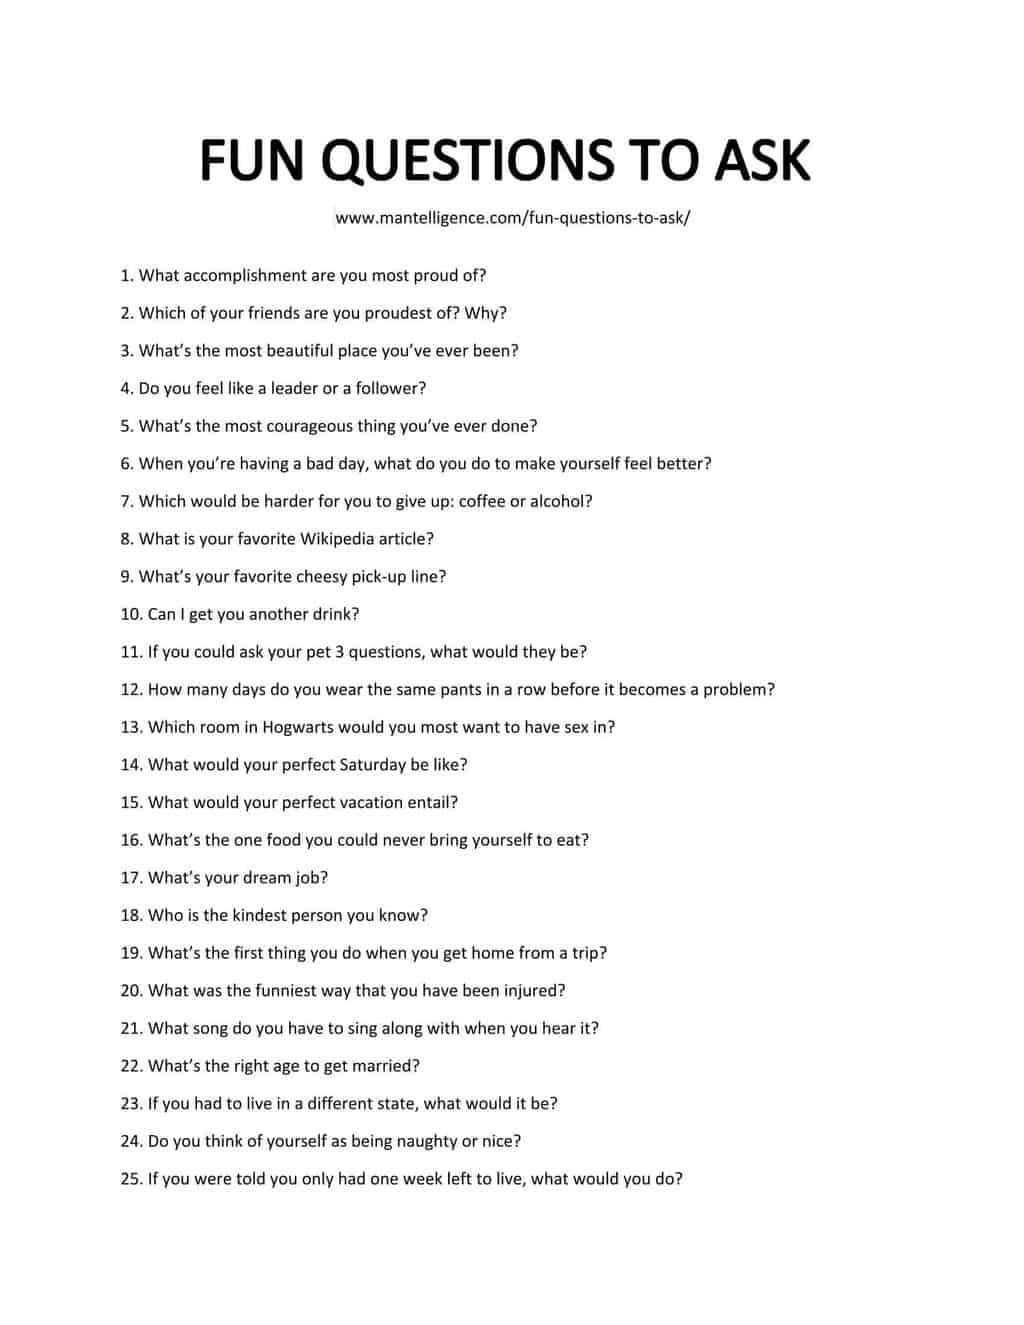 FUN QUESTIONS TO ASK 1 